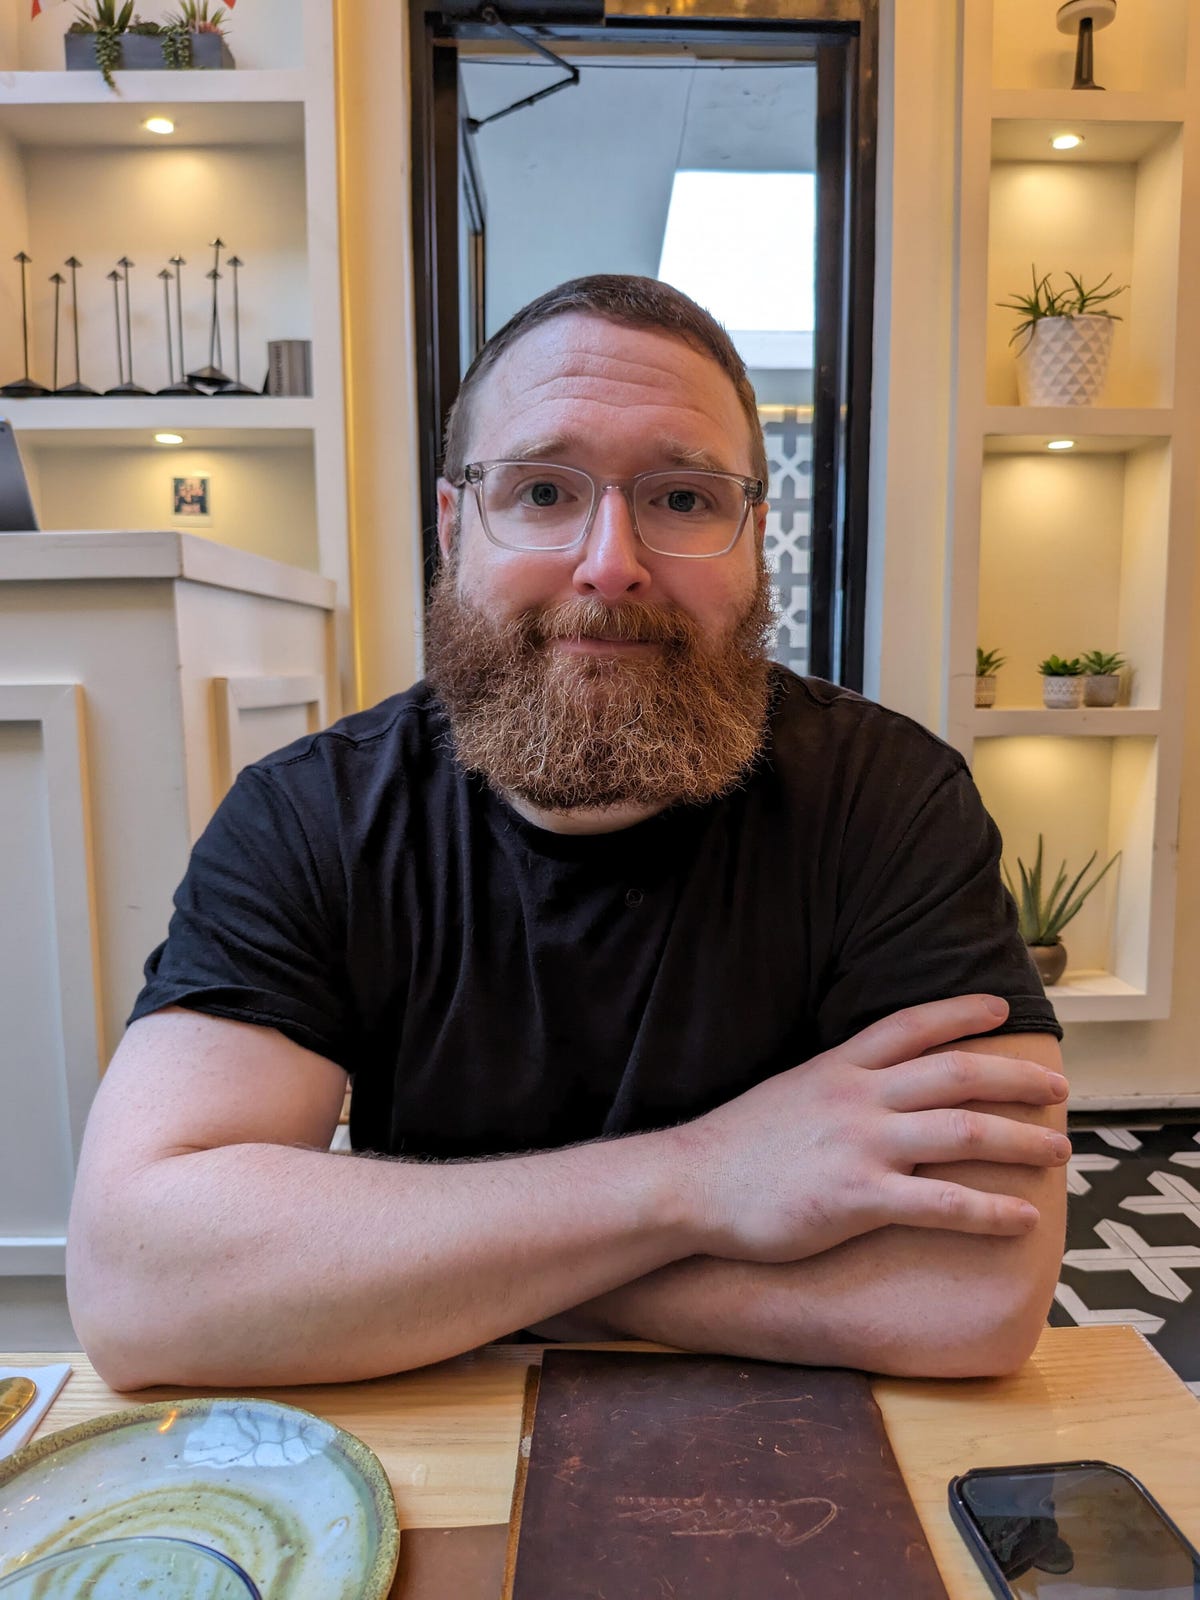 A photo of a man with a beard sitting in a restaurant